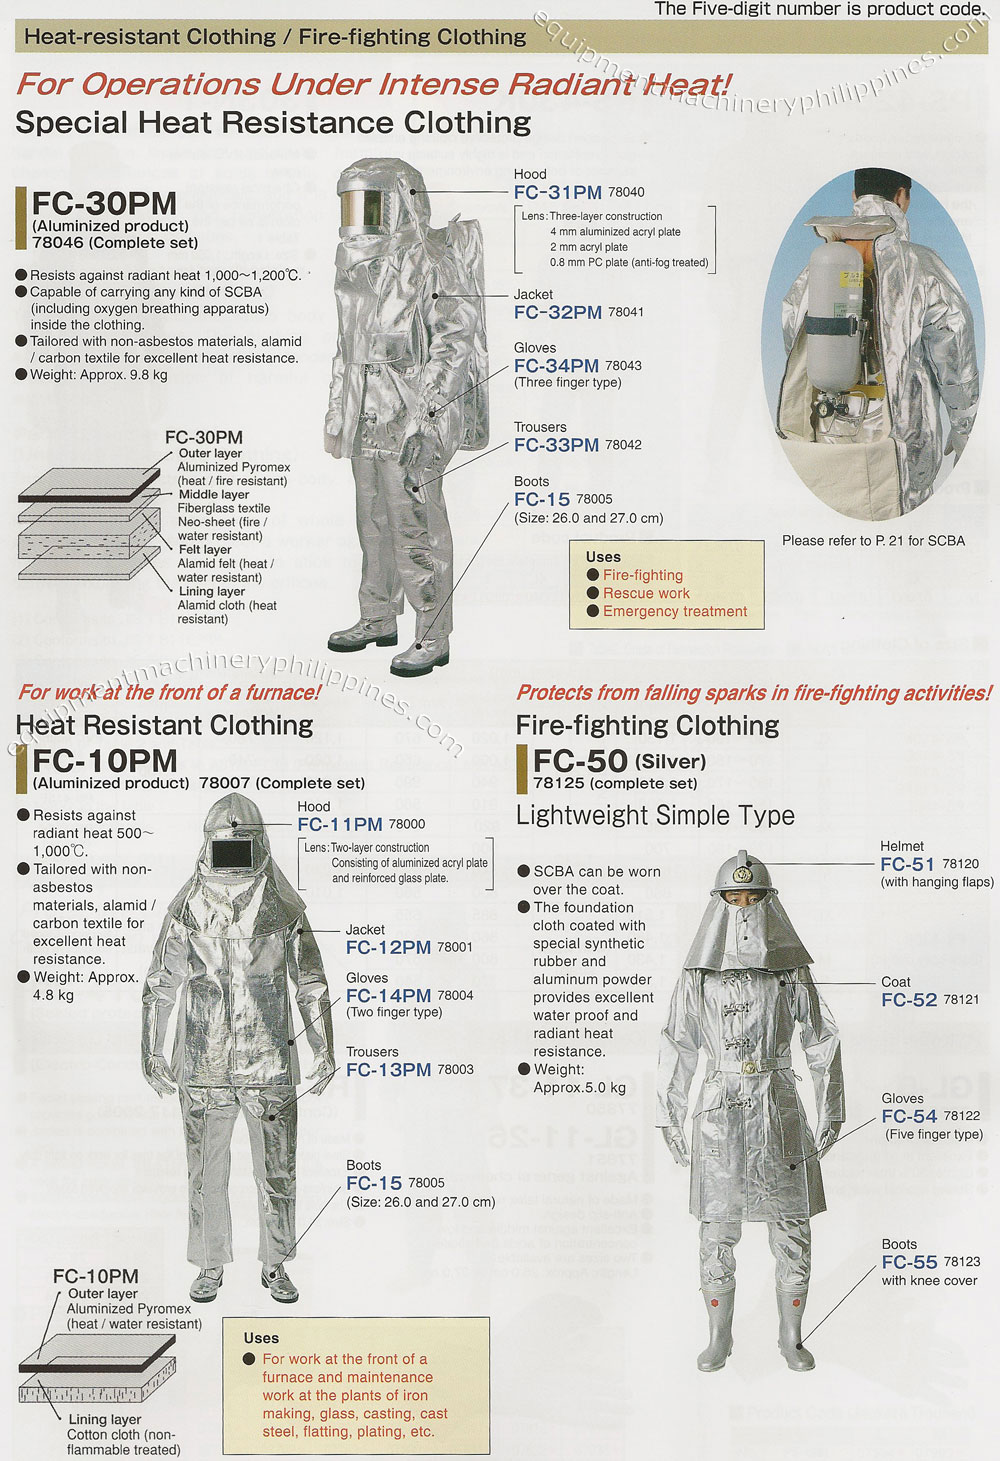 PPE Protective Clothing